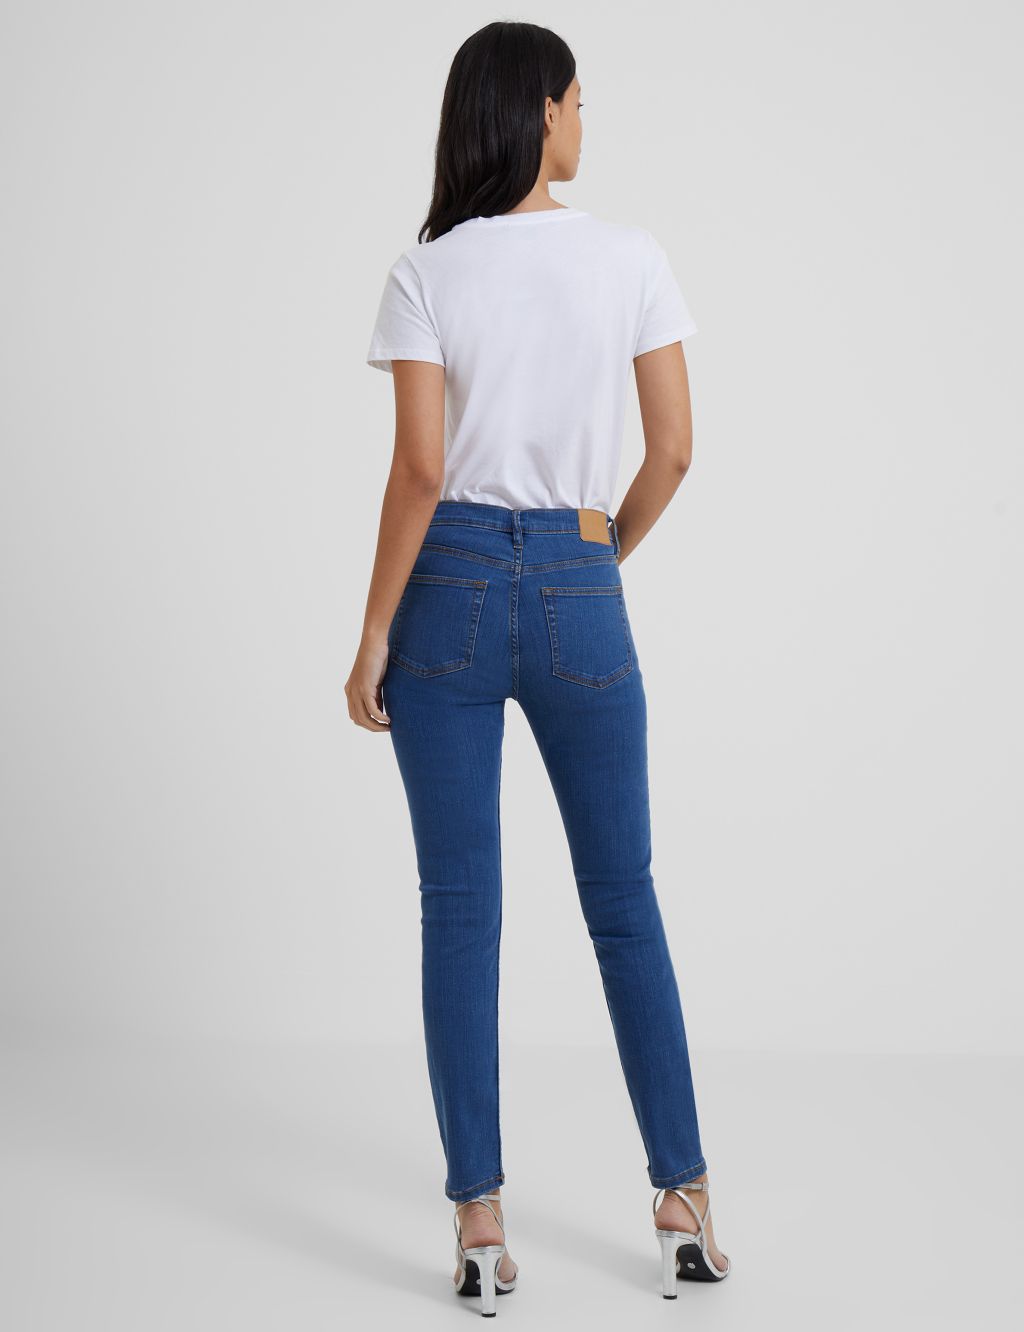 High Waisted Skinny Ankle Grazer Jeans image 2